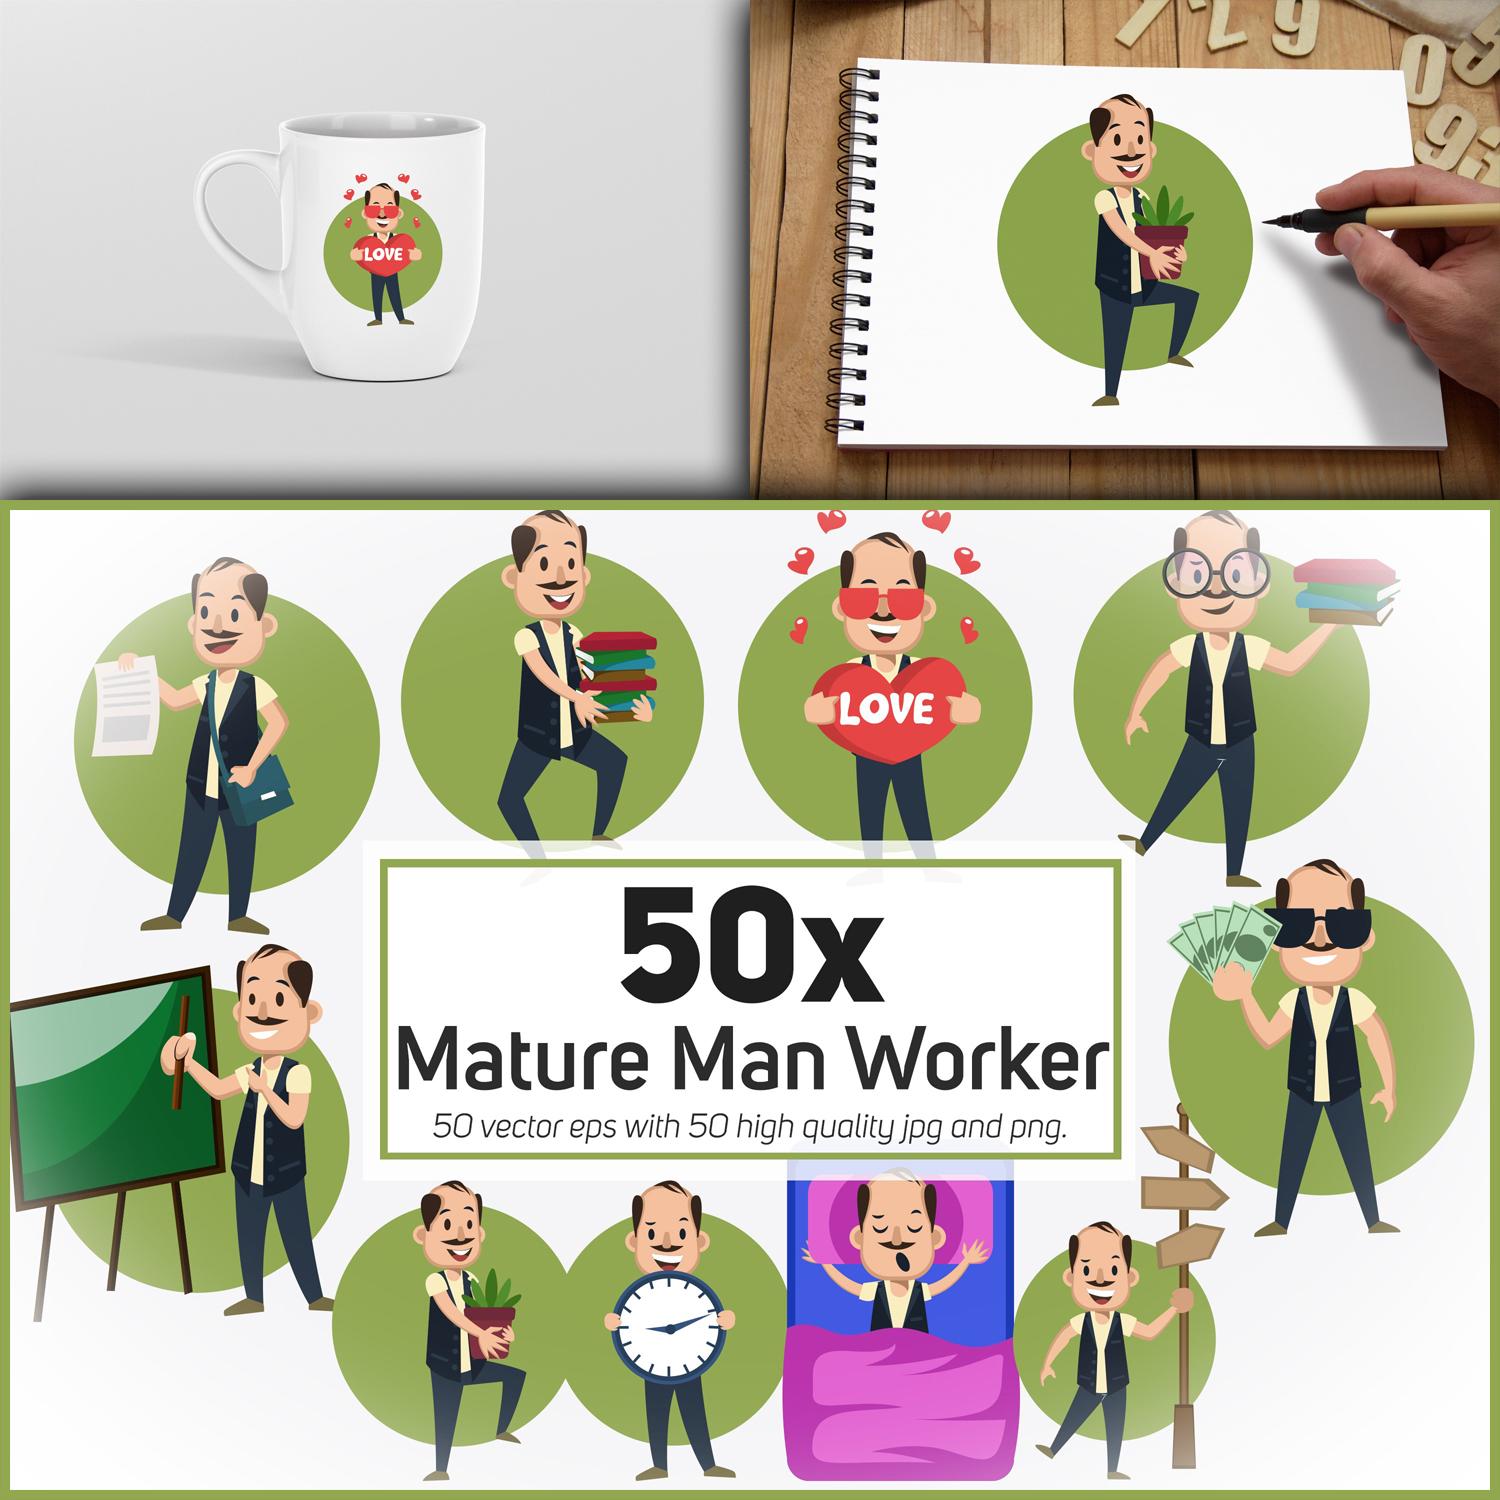 50x Mature Man Worker and Businessman collection cover.